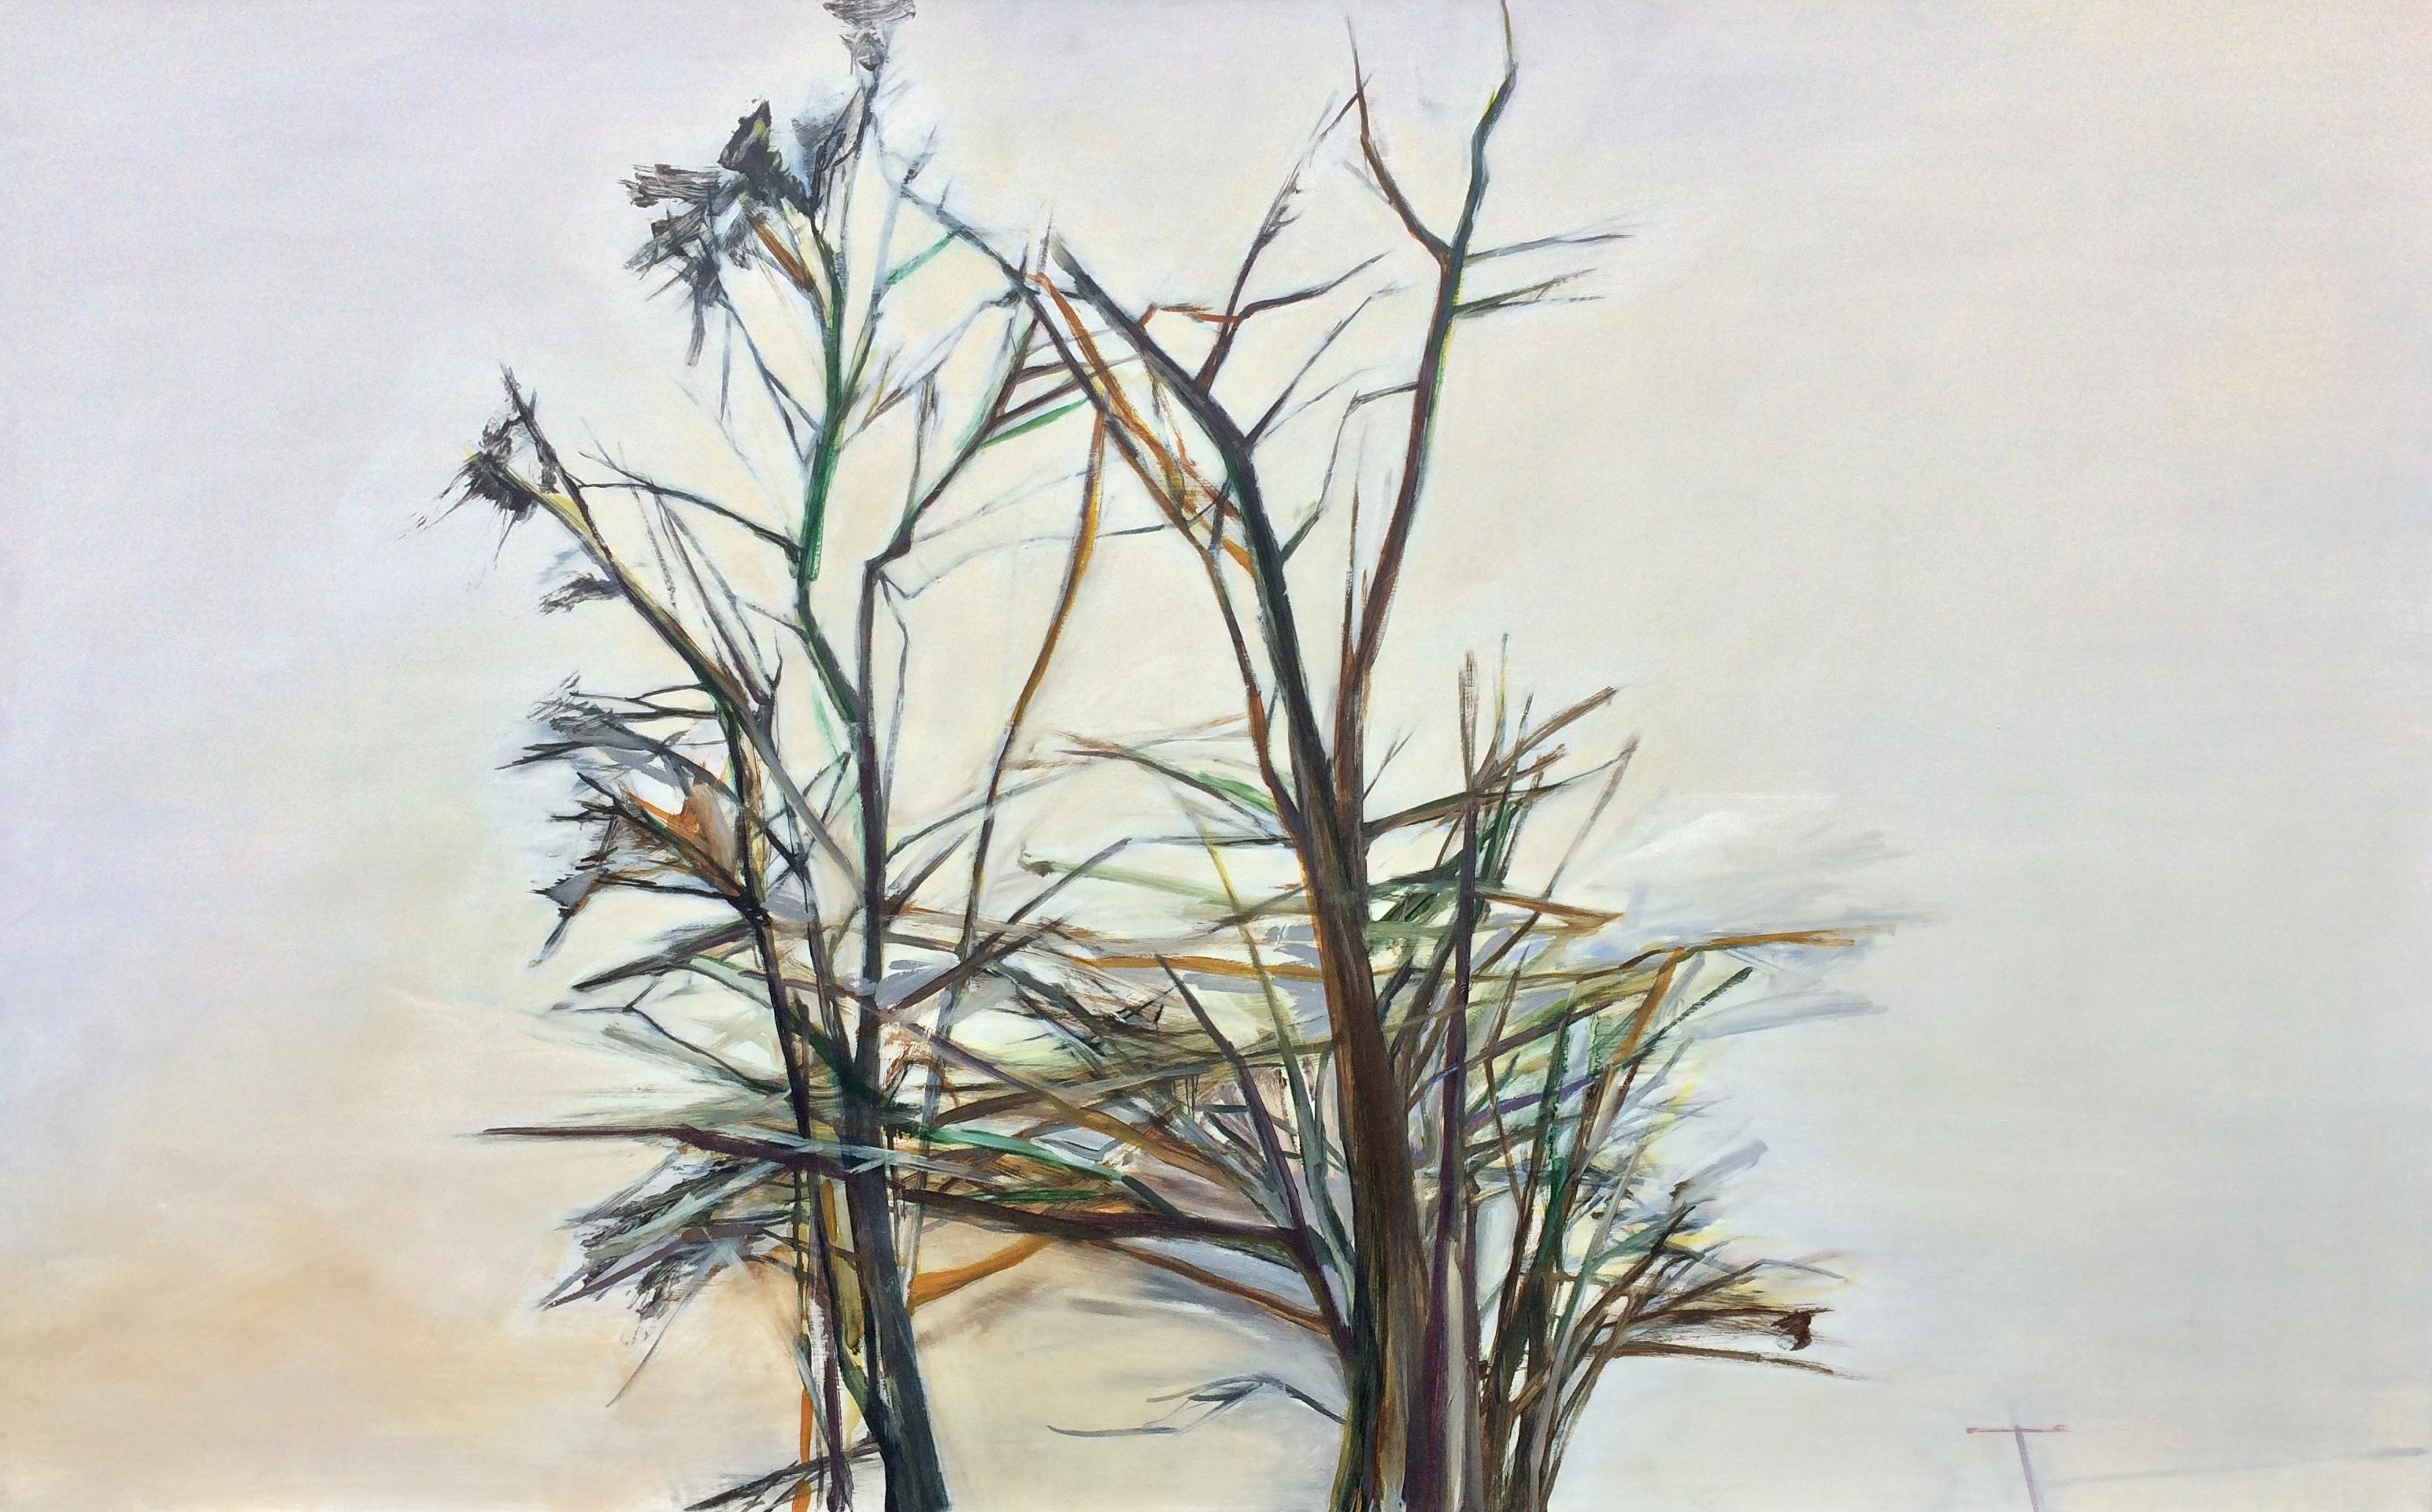 Shirley Irons Landscape Painting - White Sumac, oil on canvas, 44" x 70"